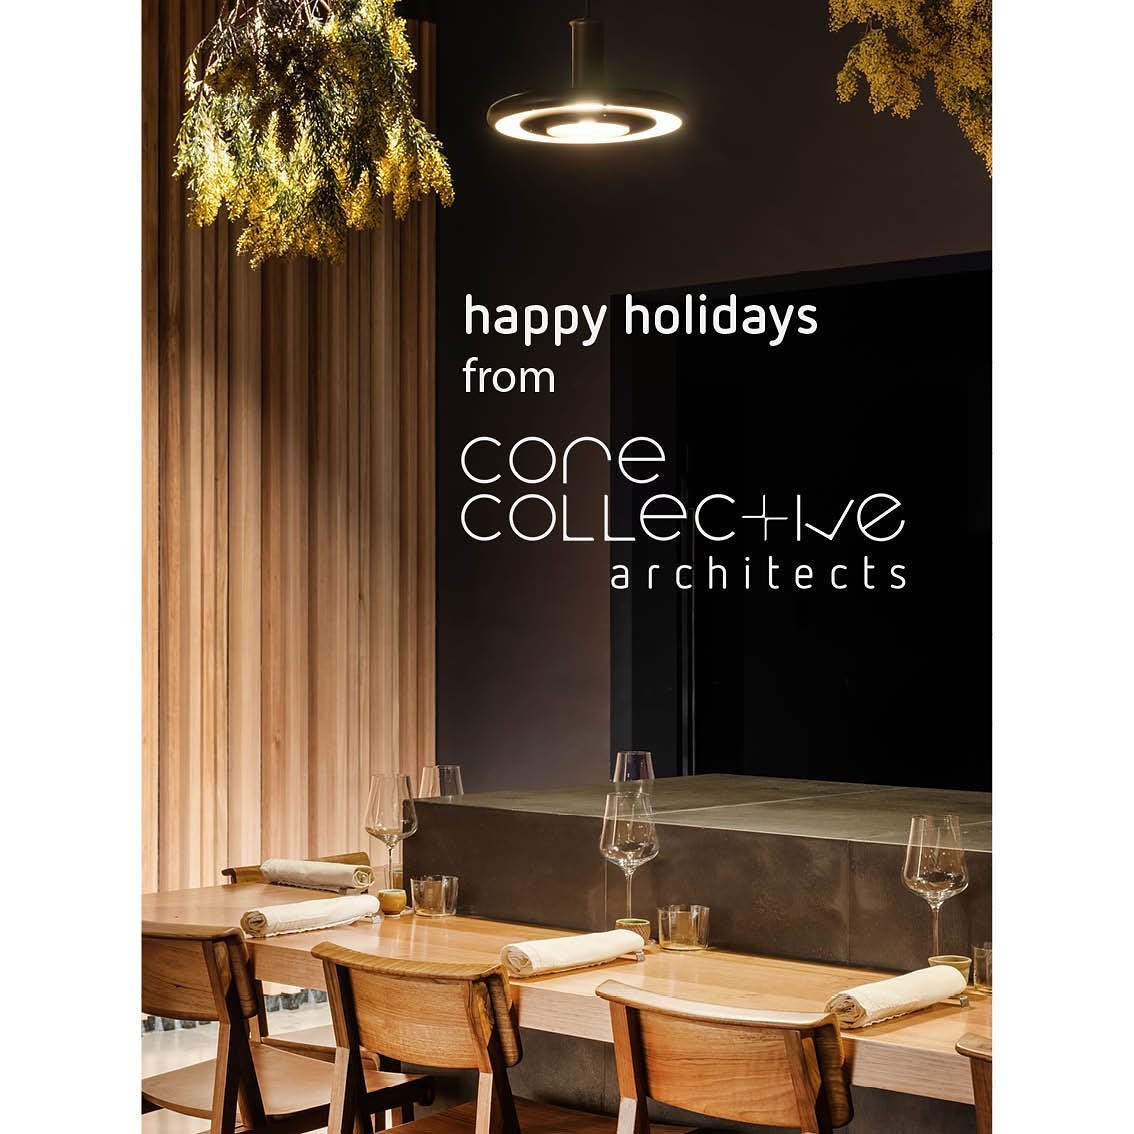 Wishing our friends, clients and collaborators a heart-warming and joyful Christmas!

It has been a significant year for the team at Core Collective - both personally and professionally. We have been working on some very special projects that we look